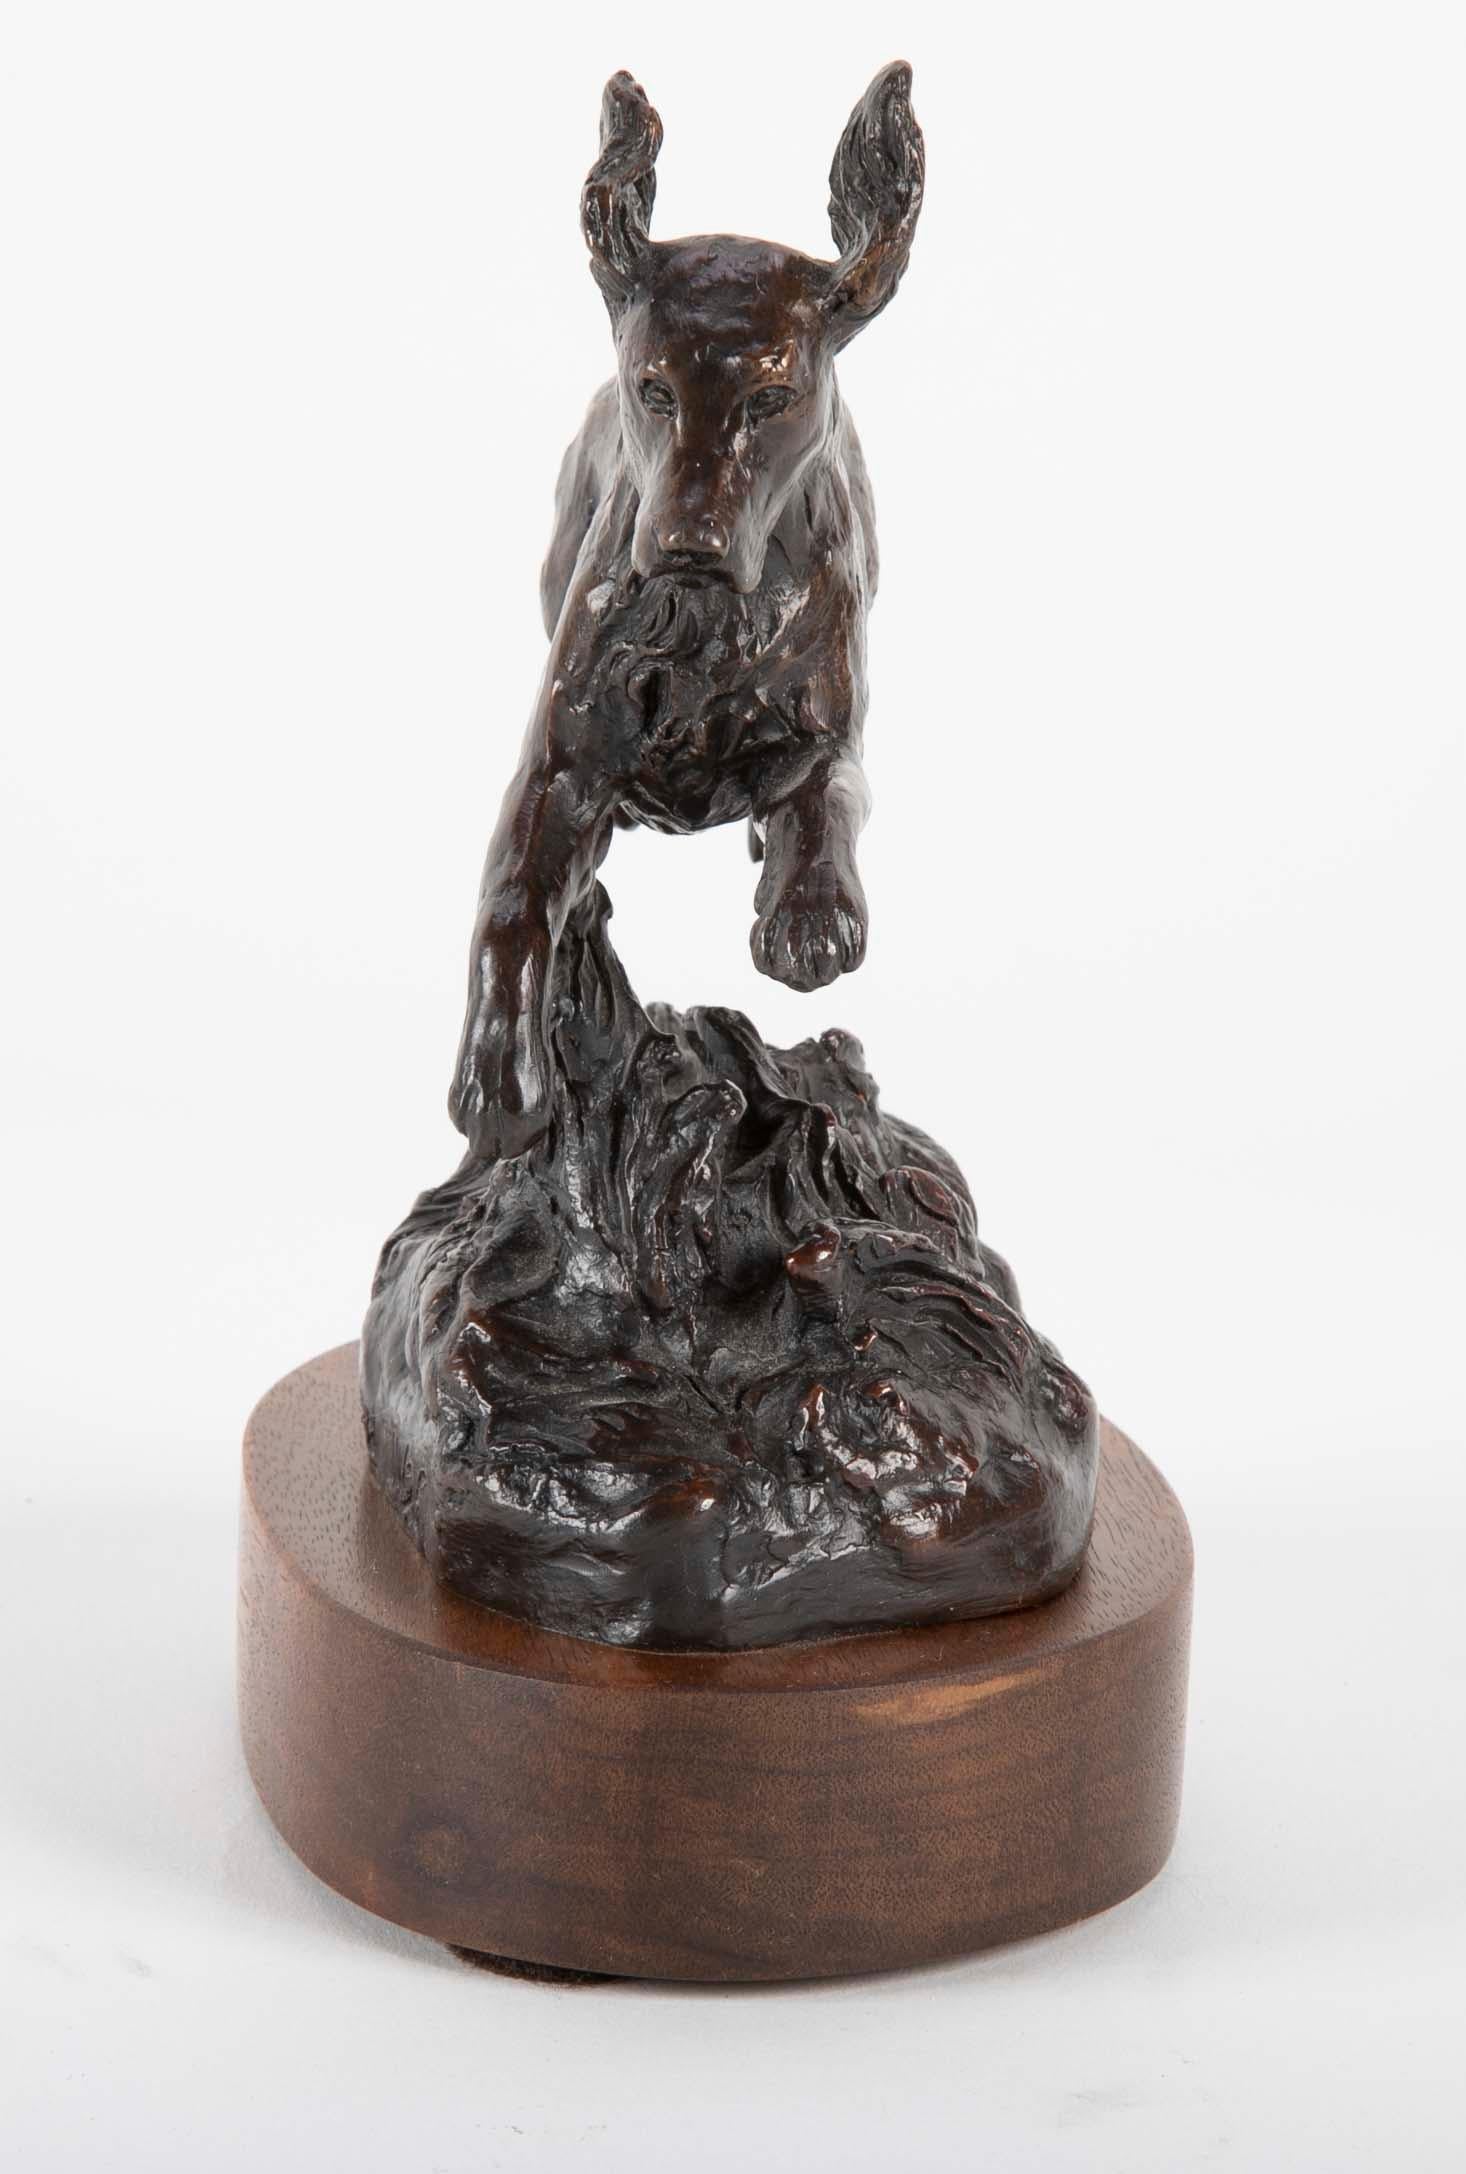 A charming depiction of a jumping Airborne dog catches the enthusiasm and joy of the animal. A great gift for dog lovers. Signed on base.

Bunny Connell, Wyoming sculptor, looks almost exclusively to the animal world for her inspiration,